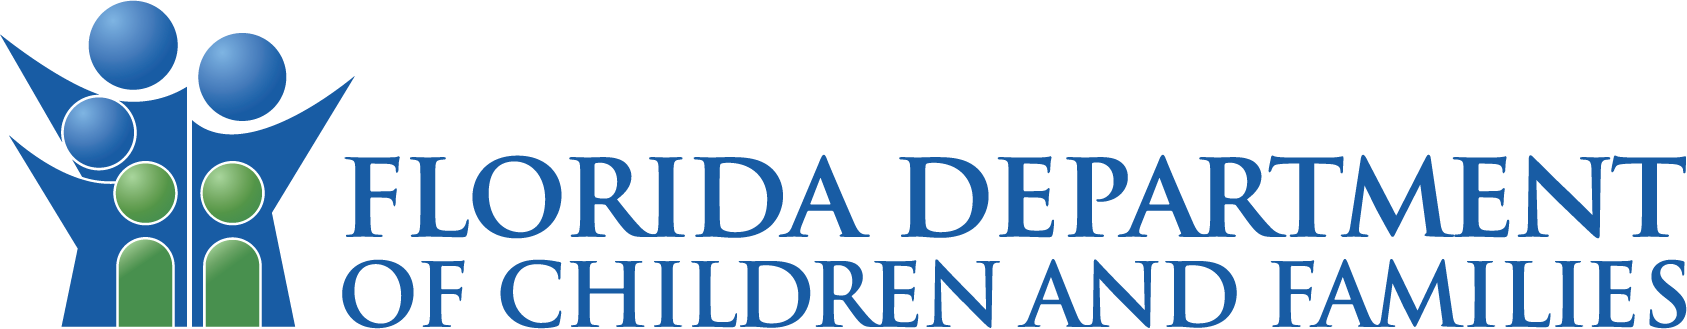 Florida Department of Children and Families 